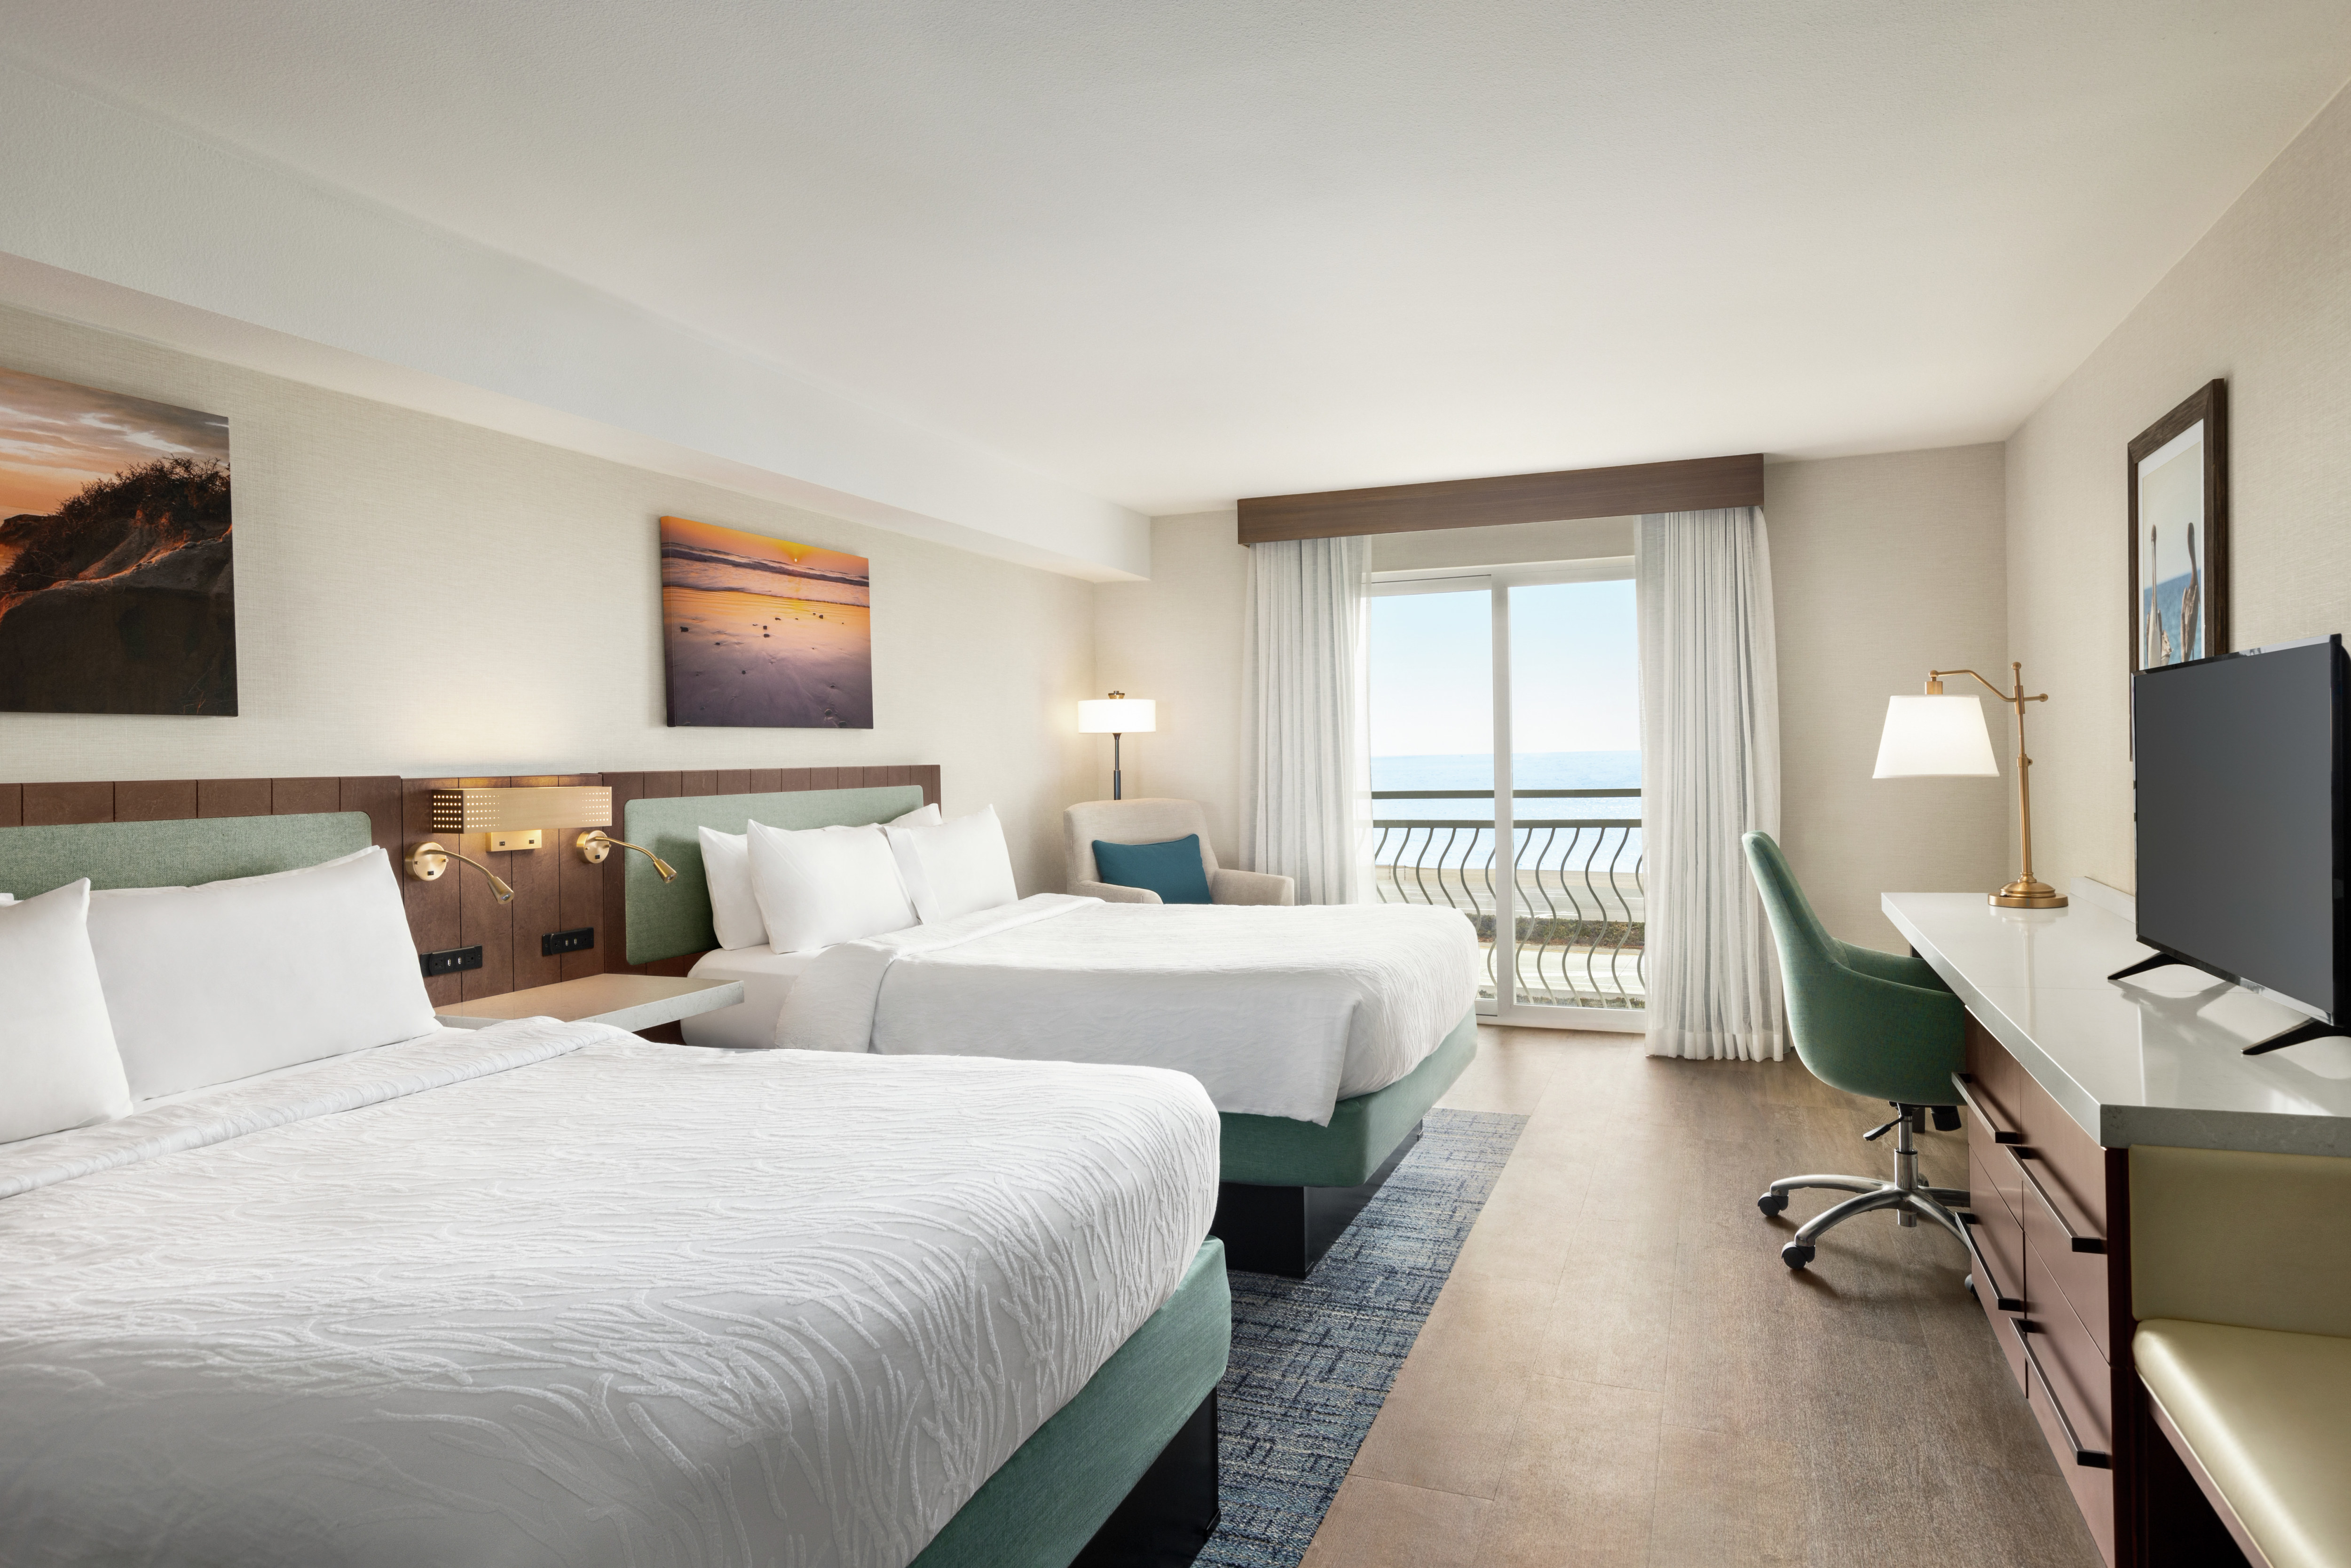 Spacious guest room featuring two comfortable queen beds, TV, work desk, and ocean view.